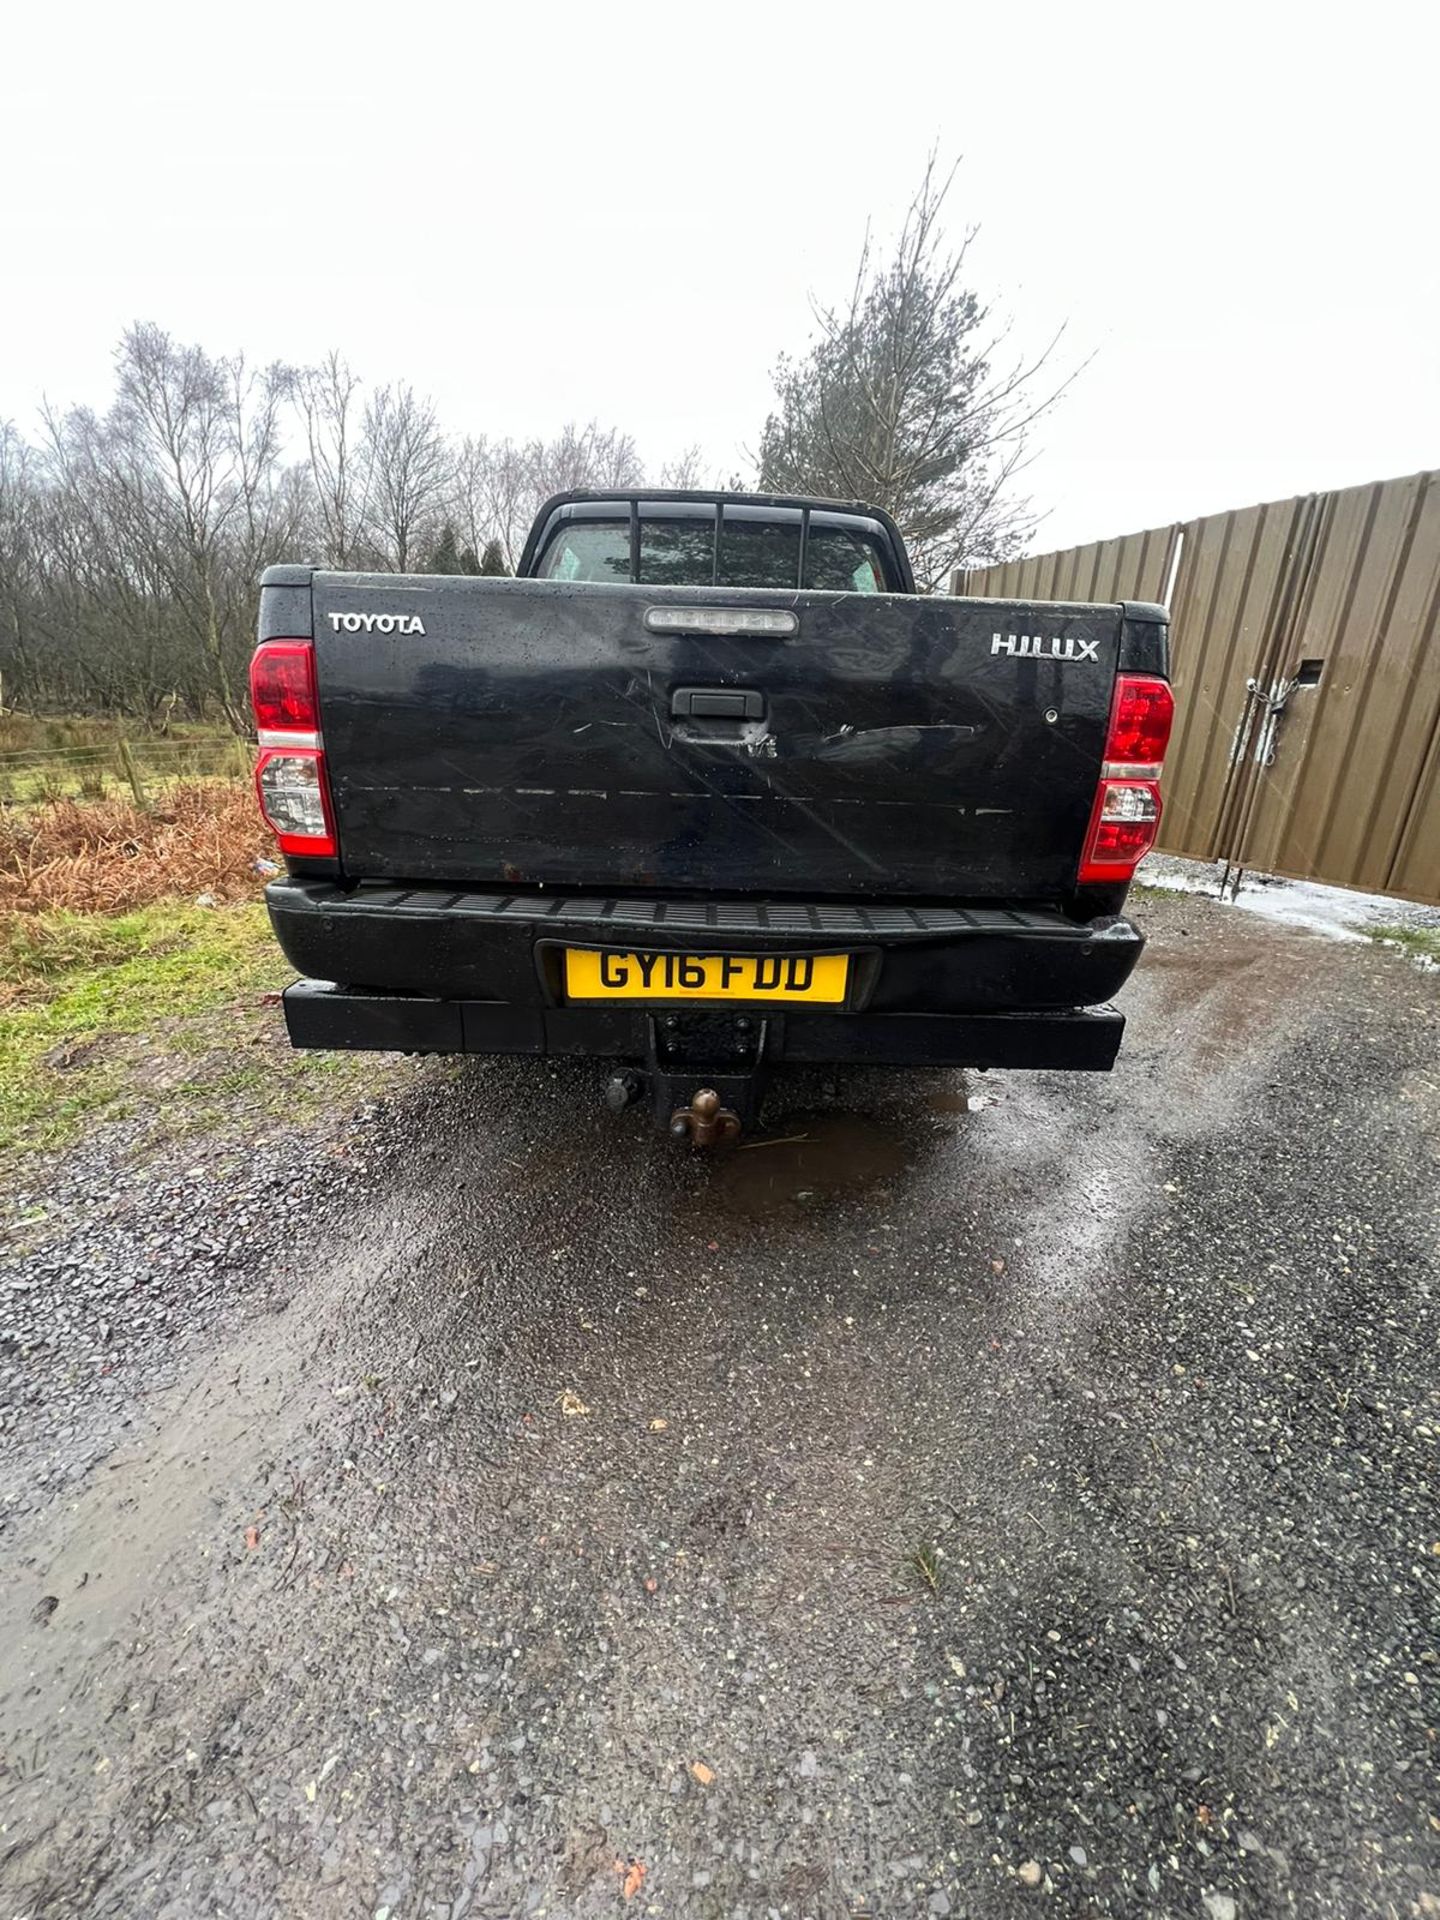 2016 TOYOTA HILUX ACTIVE 2X4 4X4 + DIFF LOCK - Image 7 of 22